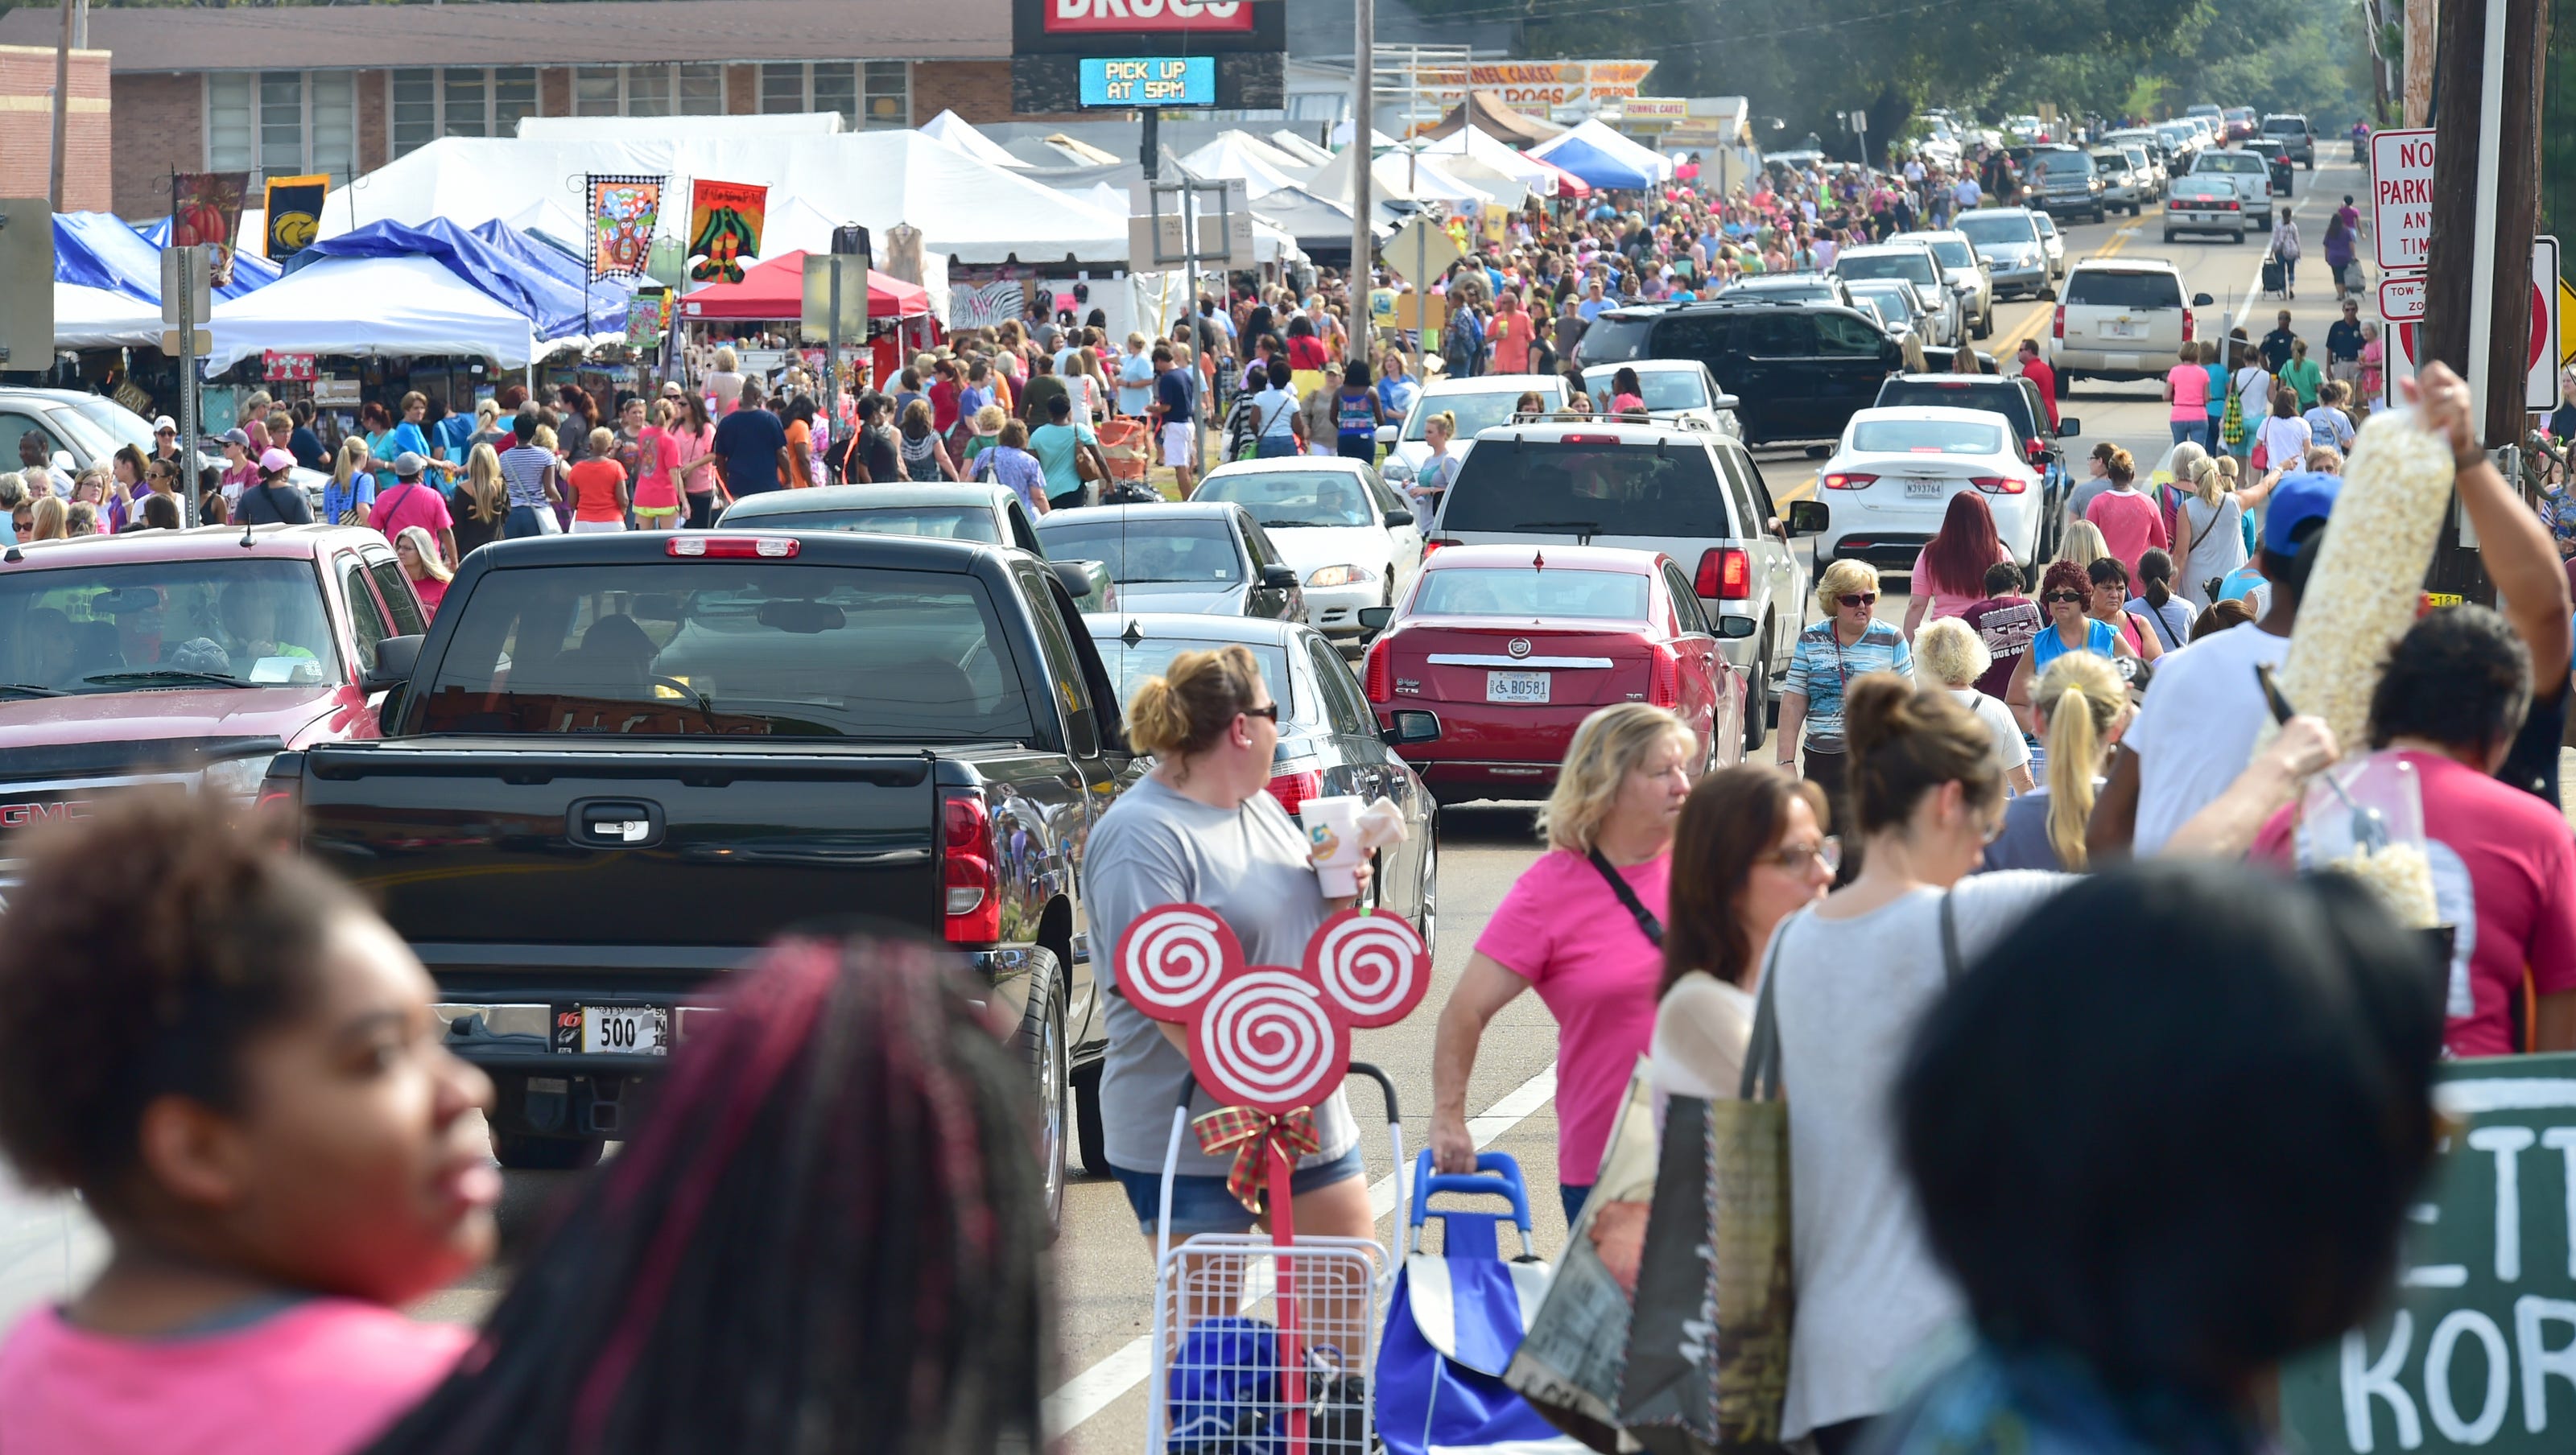 Canton Flea Market: 5 things you need to know before you go